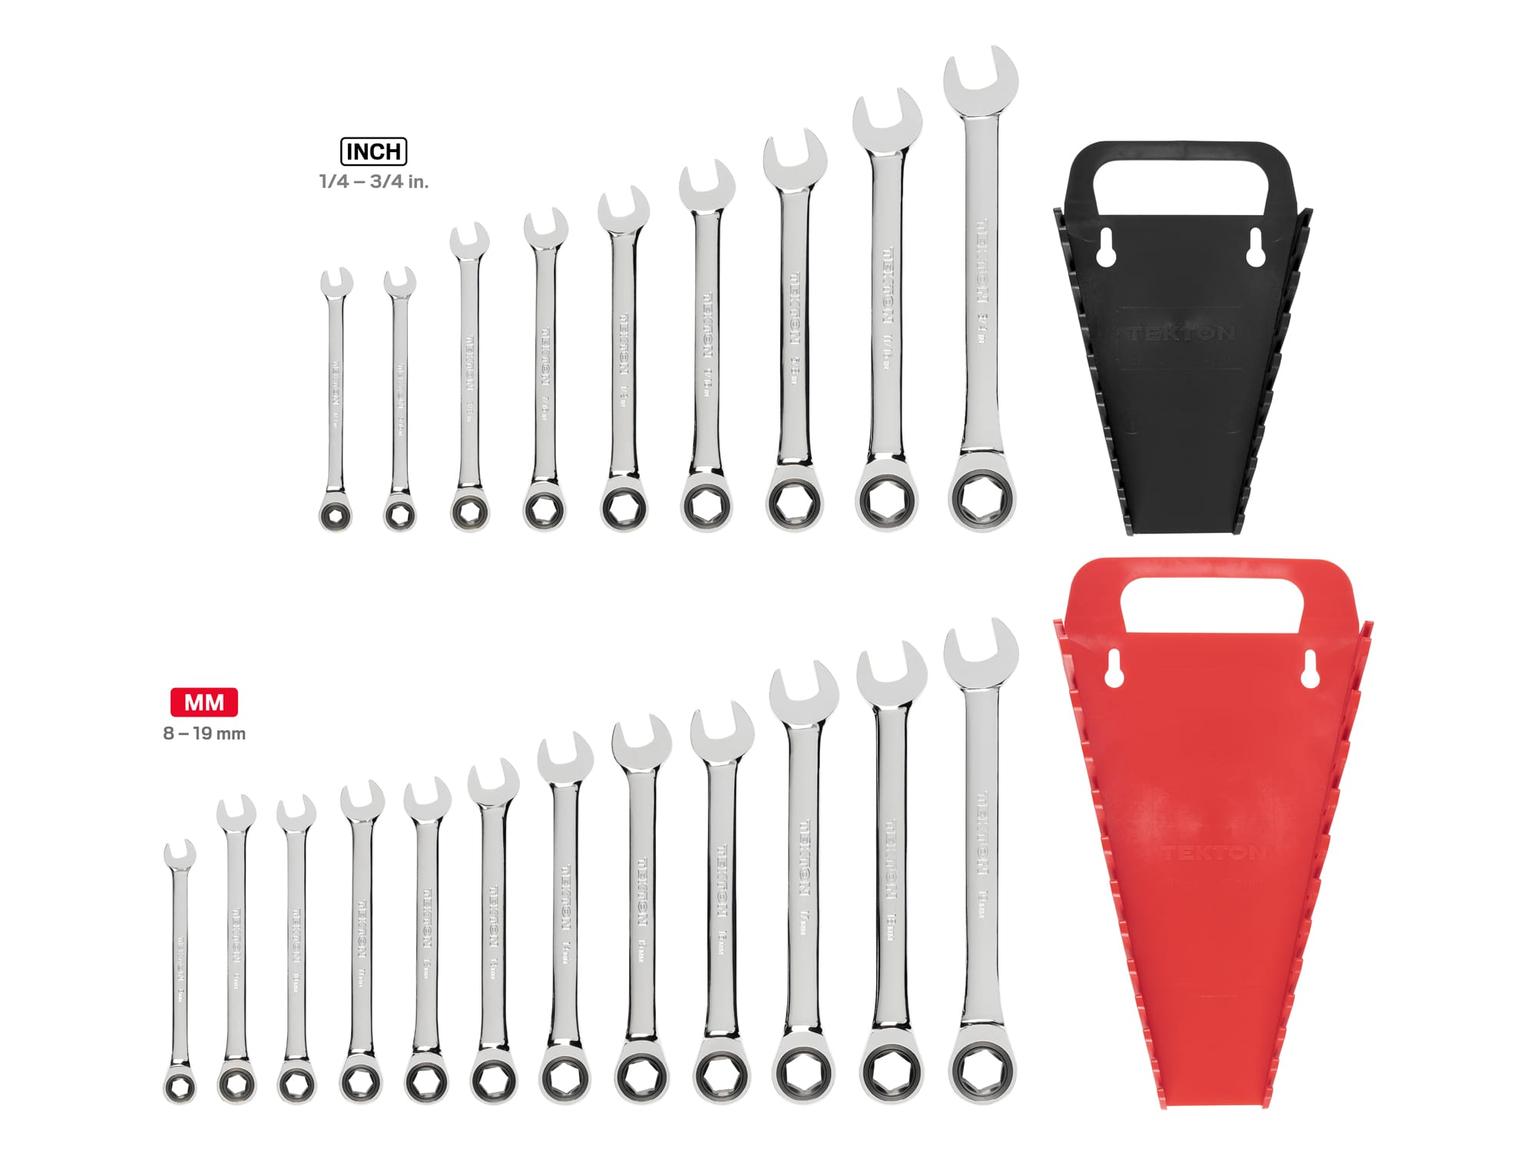 TEKTON WRN53321-T Ratcheting Combination Wrench Set with Holder, 21-Piece (1/4-3/4 in., 8-19 mm)